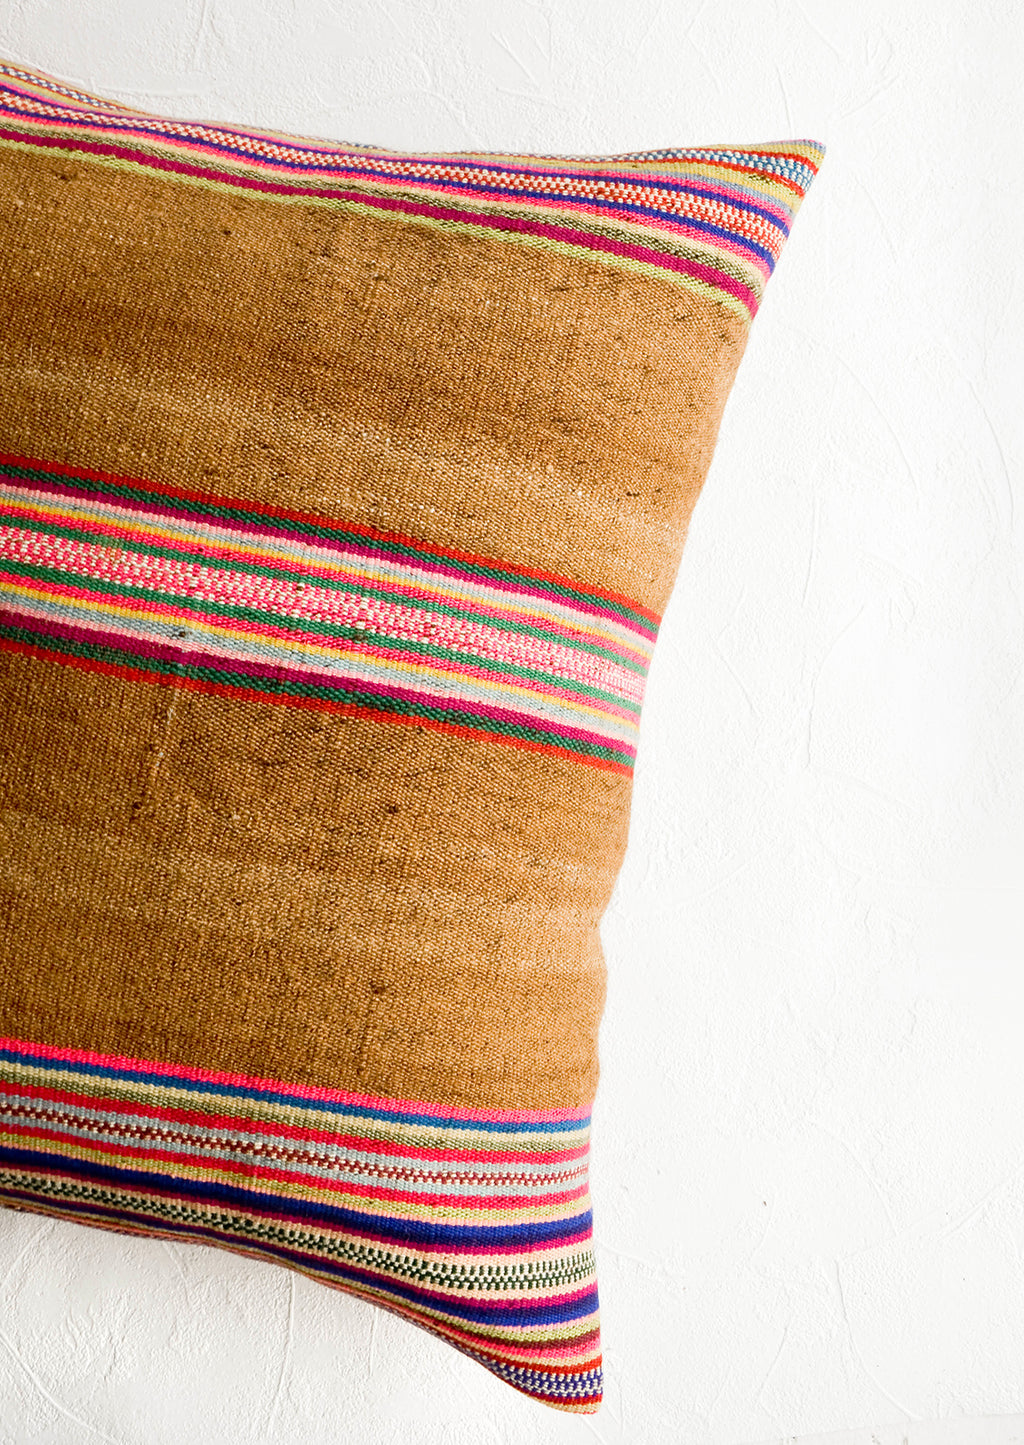 2: Square throw pillow in striped vintage wool fabric. Brown with colorful rainbow stripes.